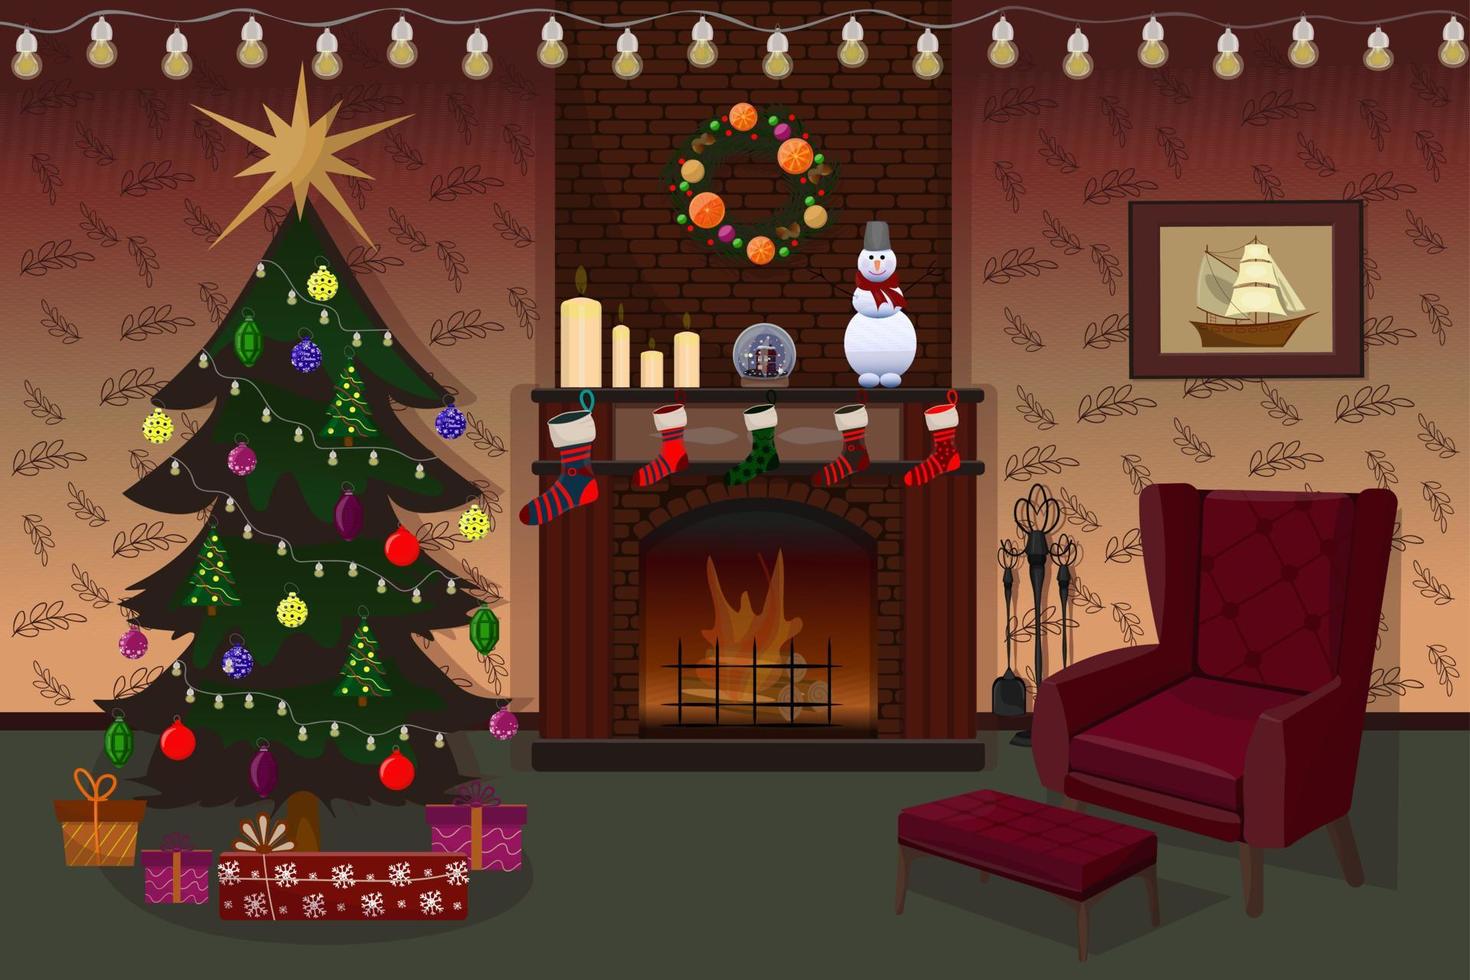 Christmas room interior. Christmas tree, gift and decorations. Living room with fireplace and armchair, decorated for Christmas. vector